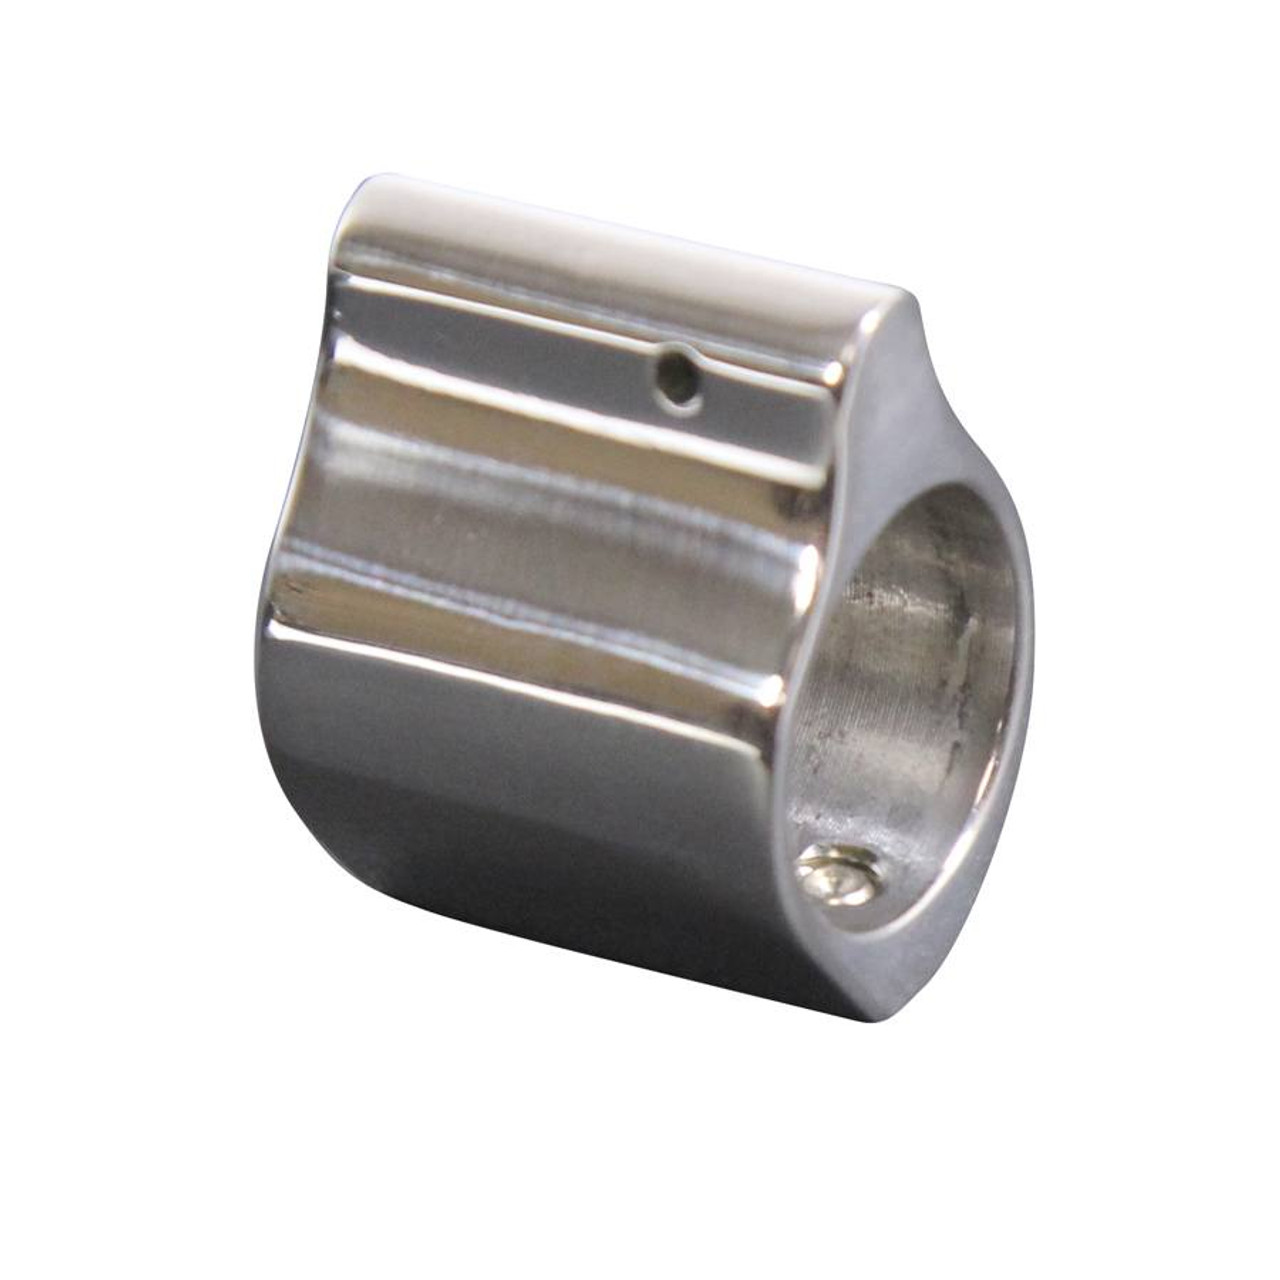 Guntec USA GT750SS-STS-P AR-15 Polished Stainless Steel Low Profile Gas Block